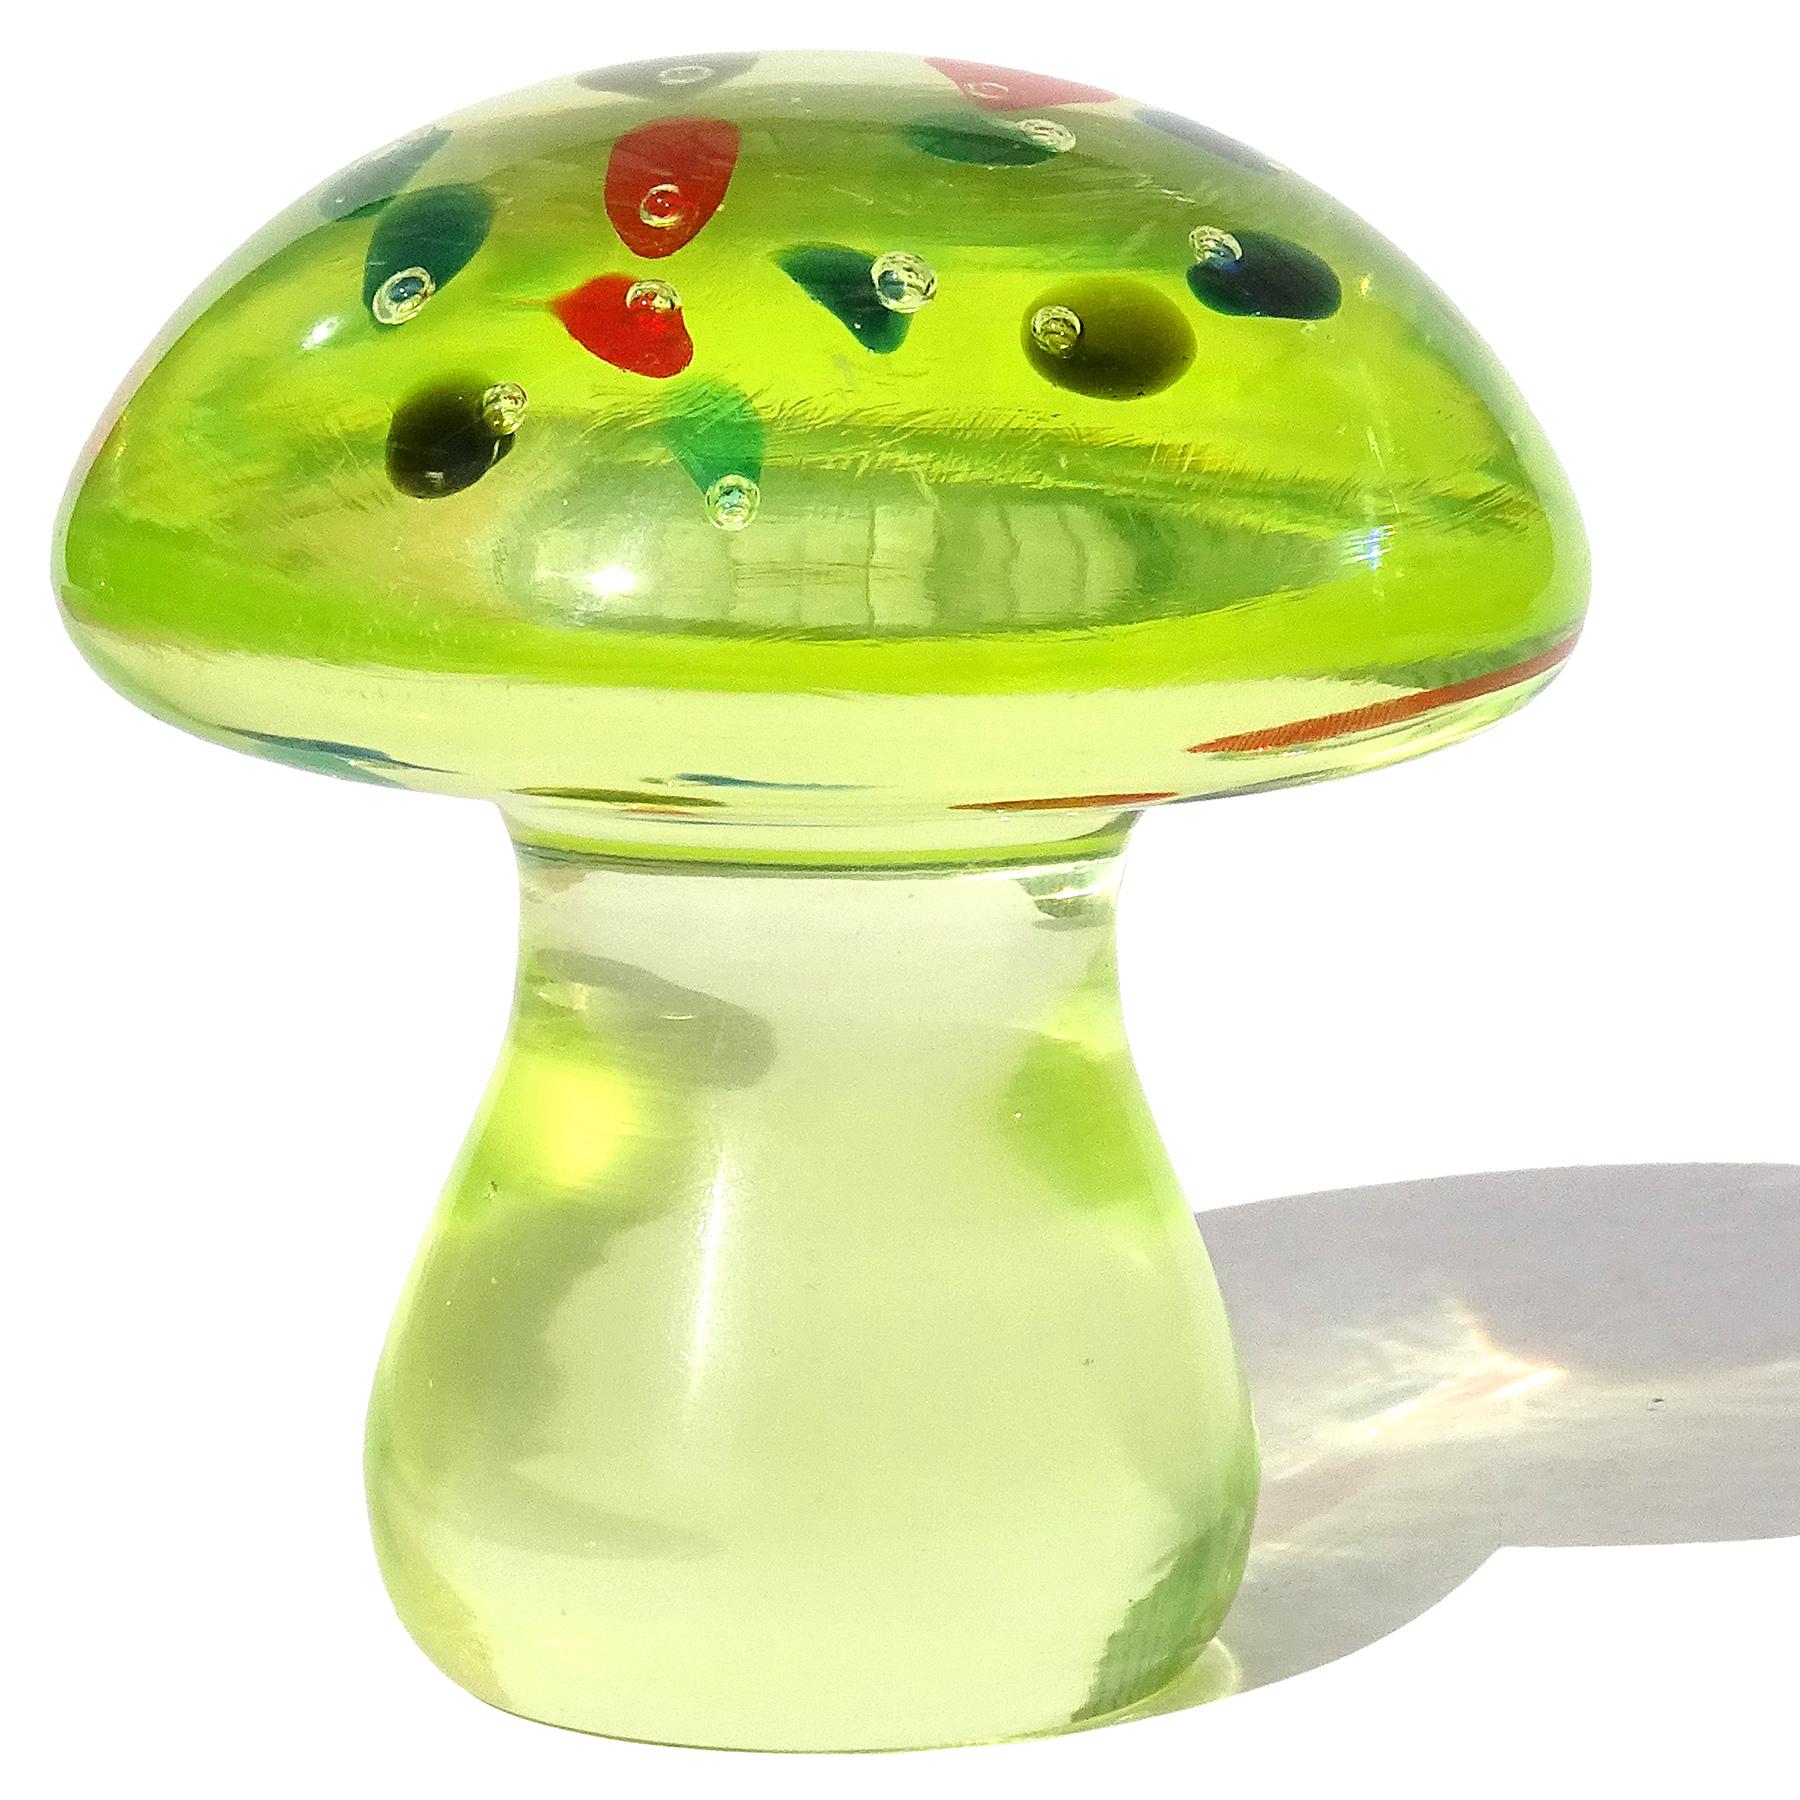 Beautiful vintage Murano hand blown Sommerso light green, with multicolor spots Italian art glass mushroom / toadstool paperweight. Documented to the Cenedese company. The mushroom cap has floating controlled bubbles within, that are surrounded by